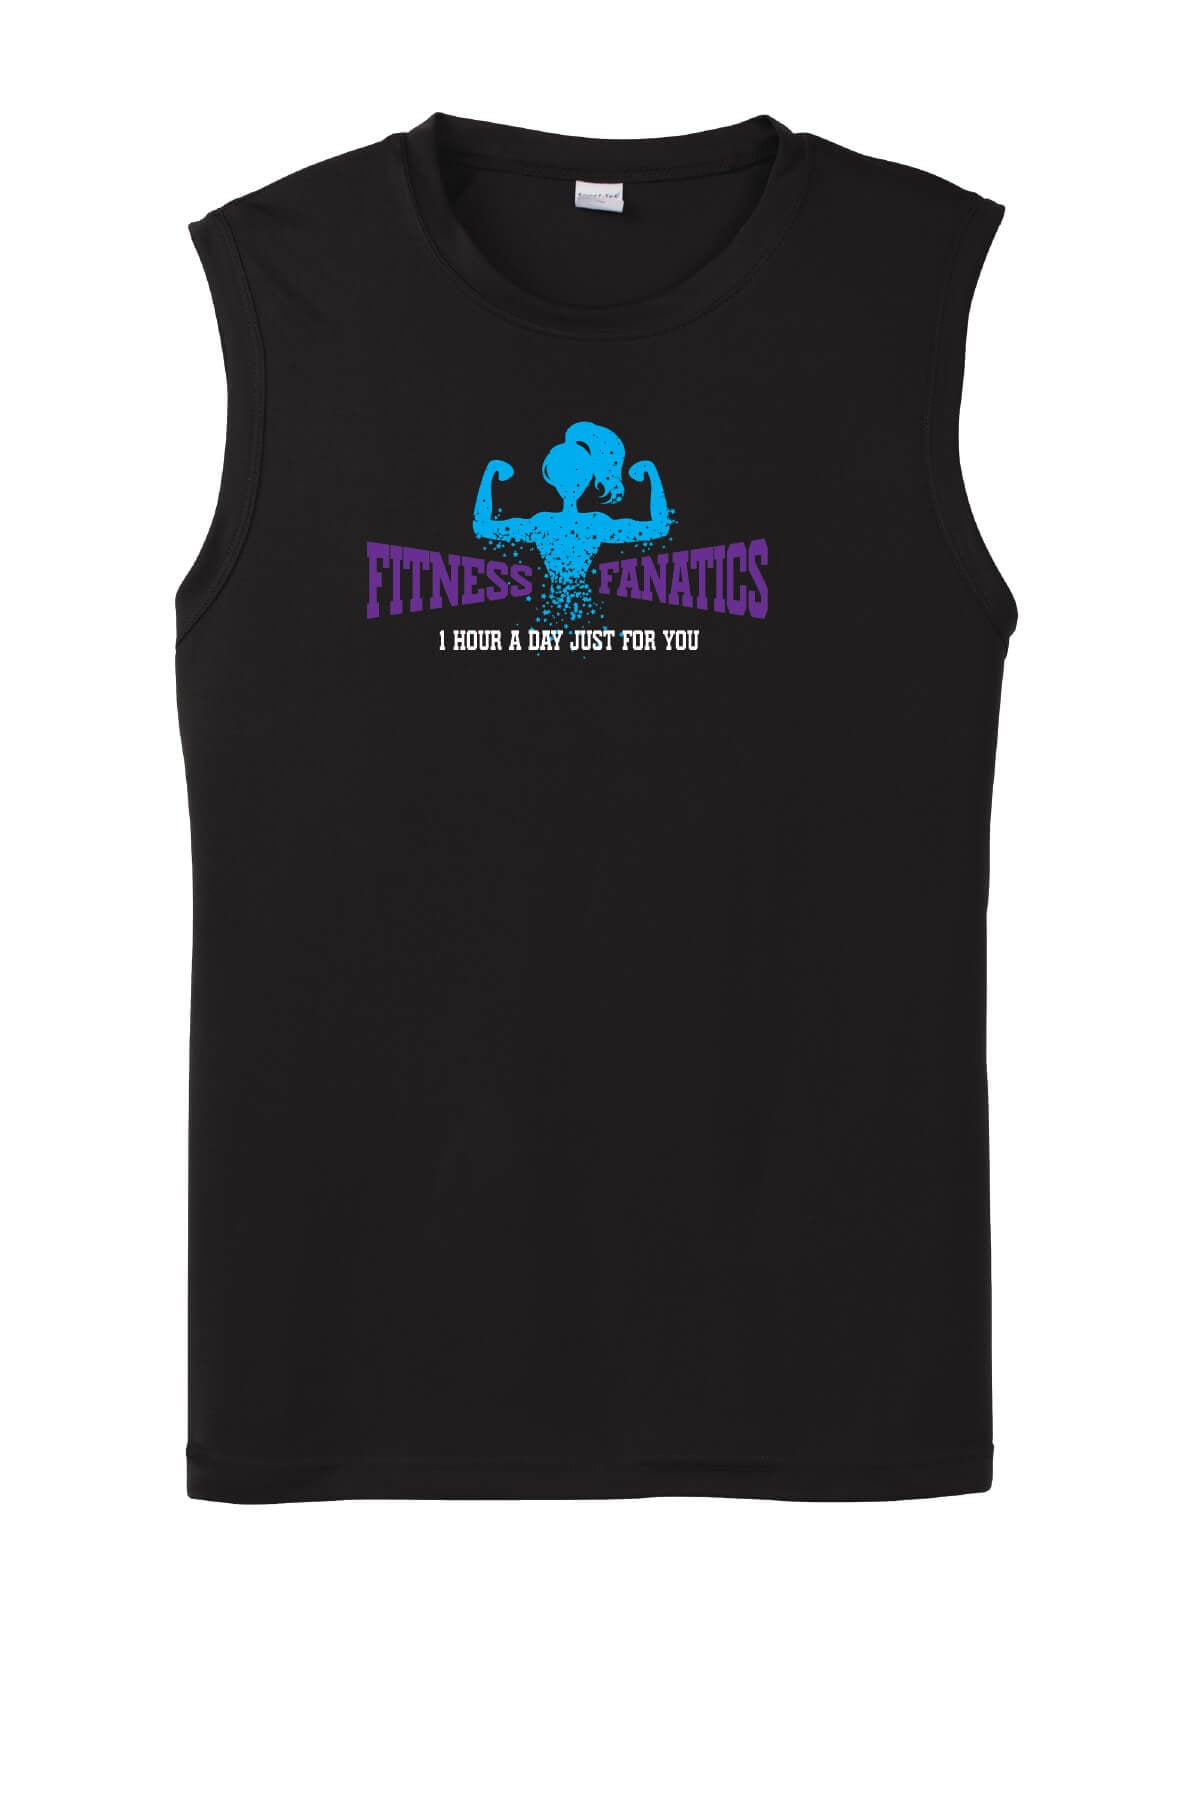 Mens Competitor Tank black with blue